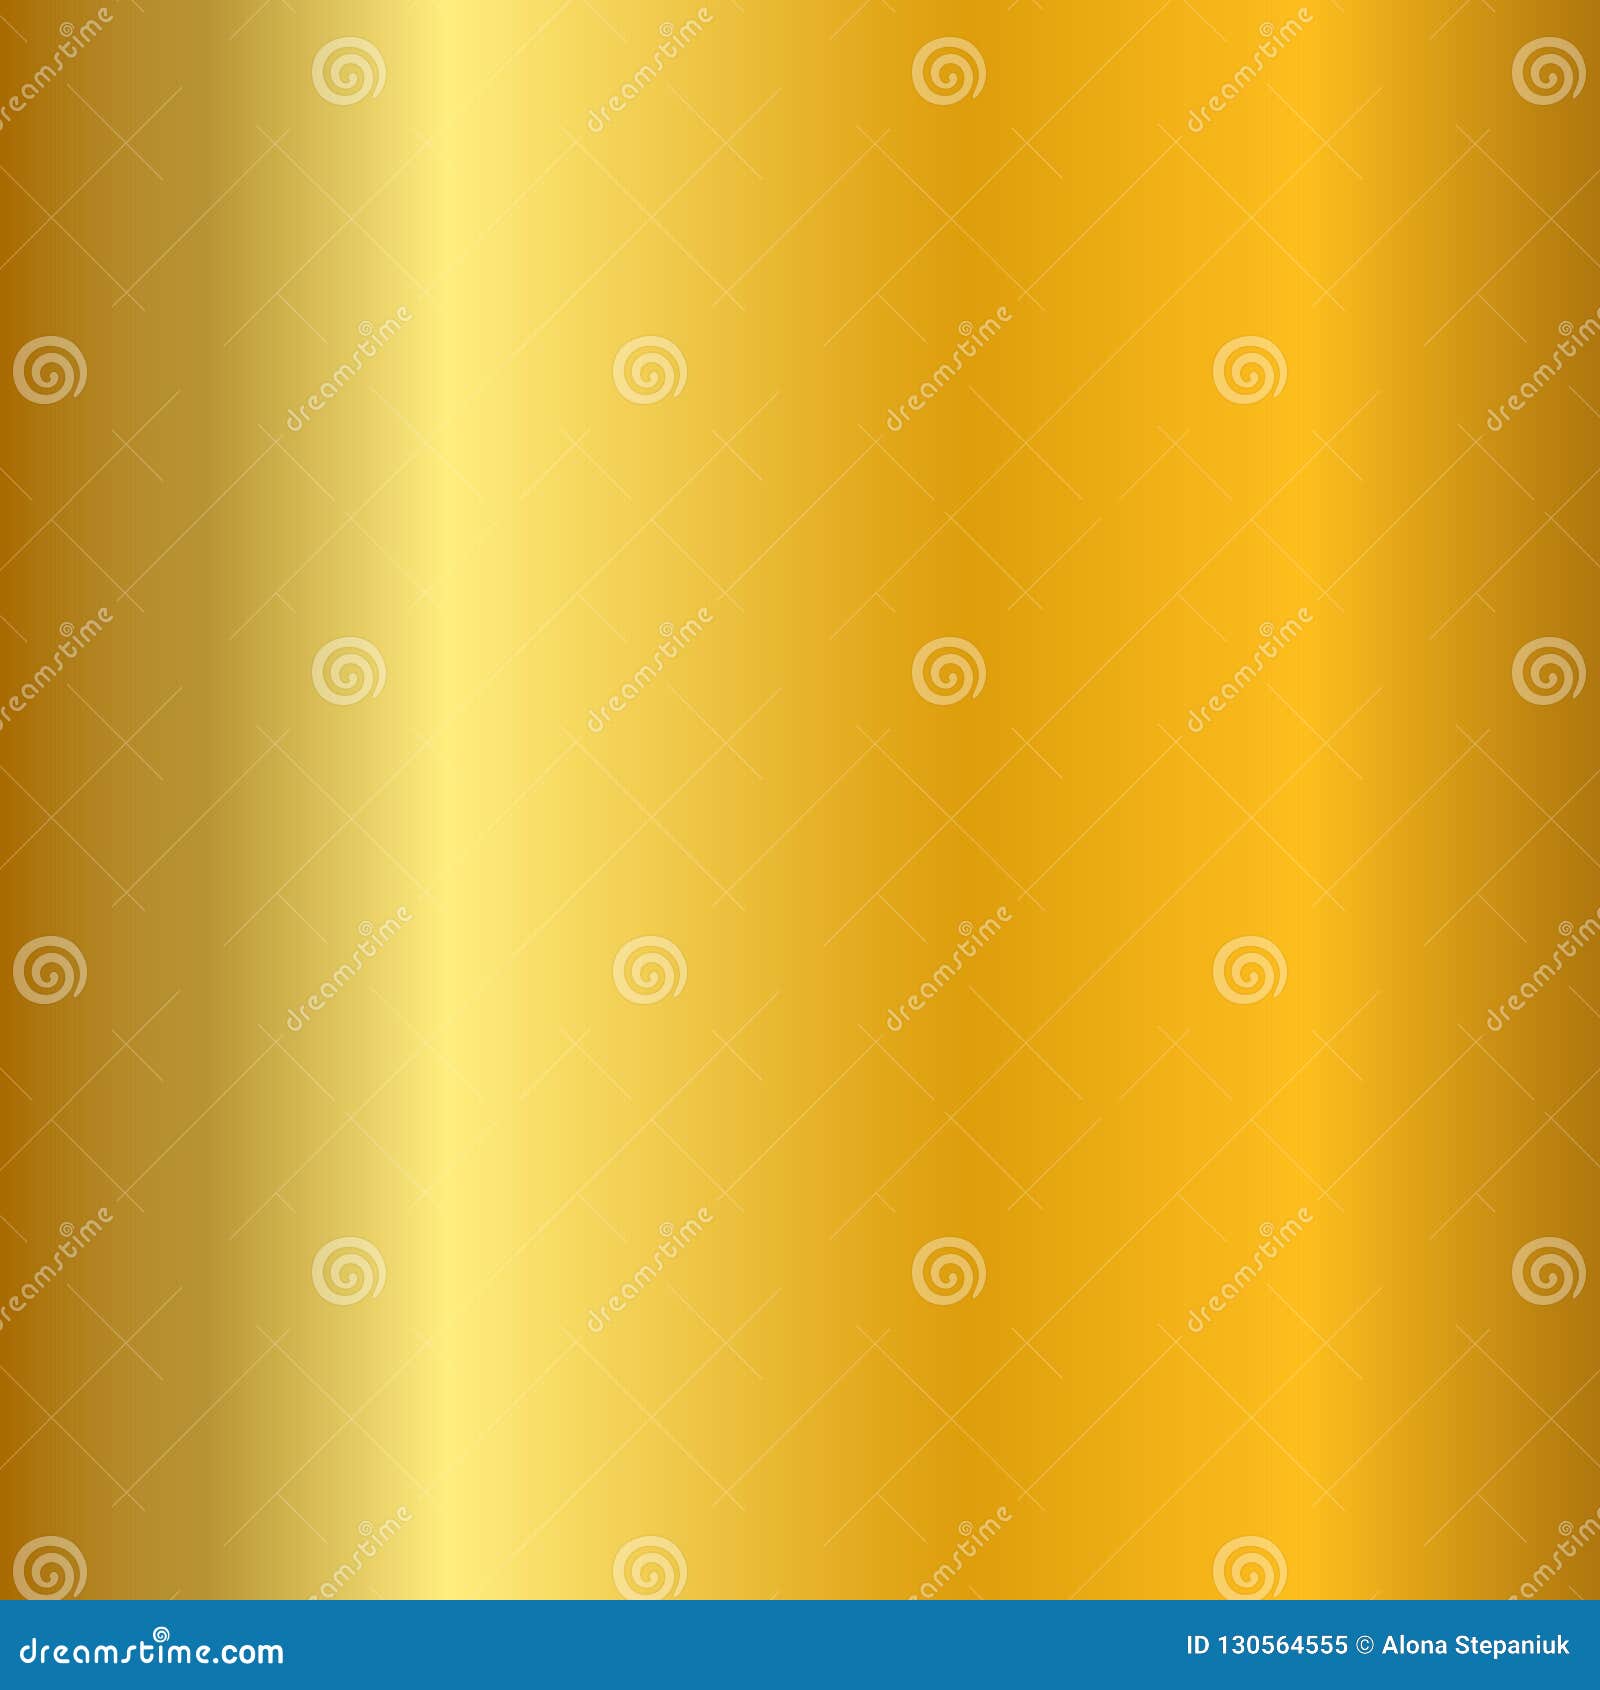 gold gradient smooth texture. empty golden metal background. light metallic plate template, abstract pattern. bright